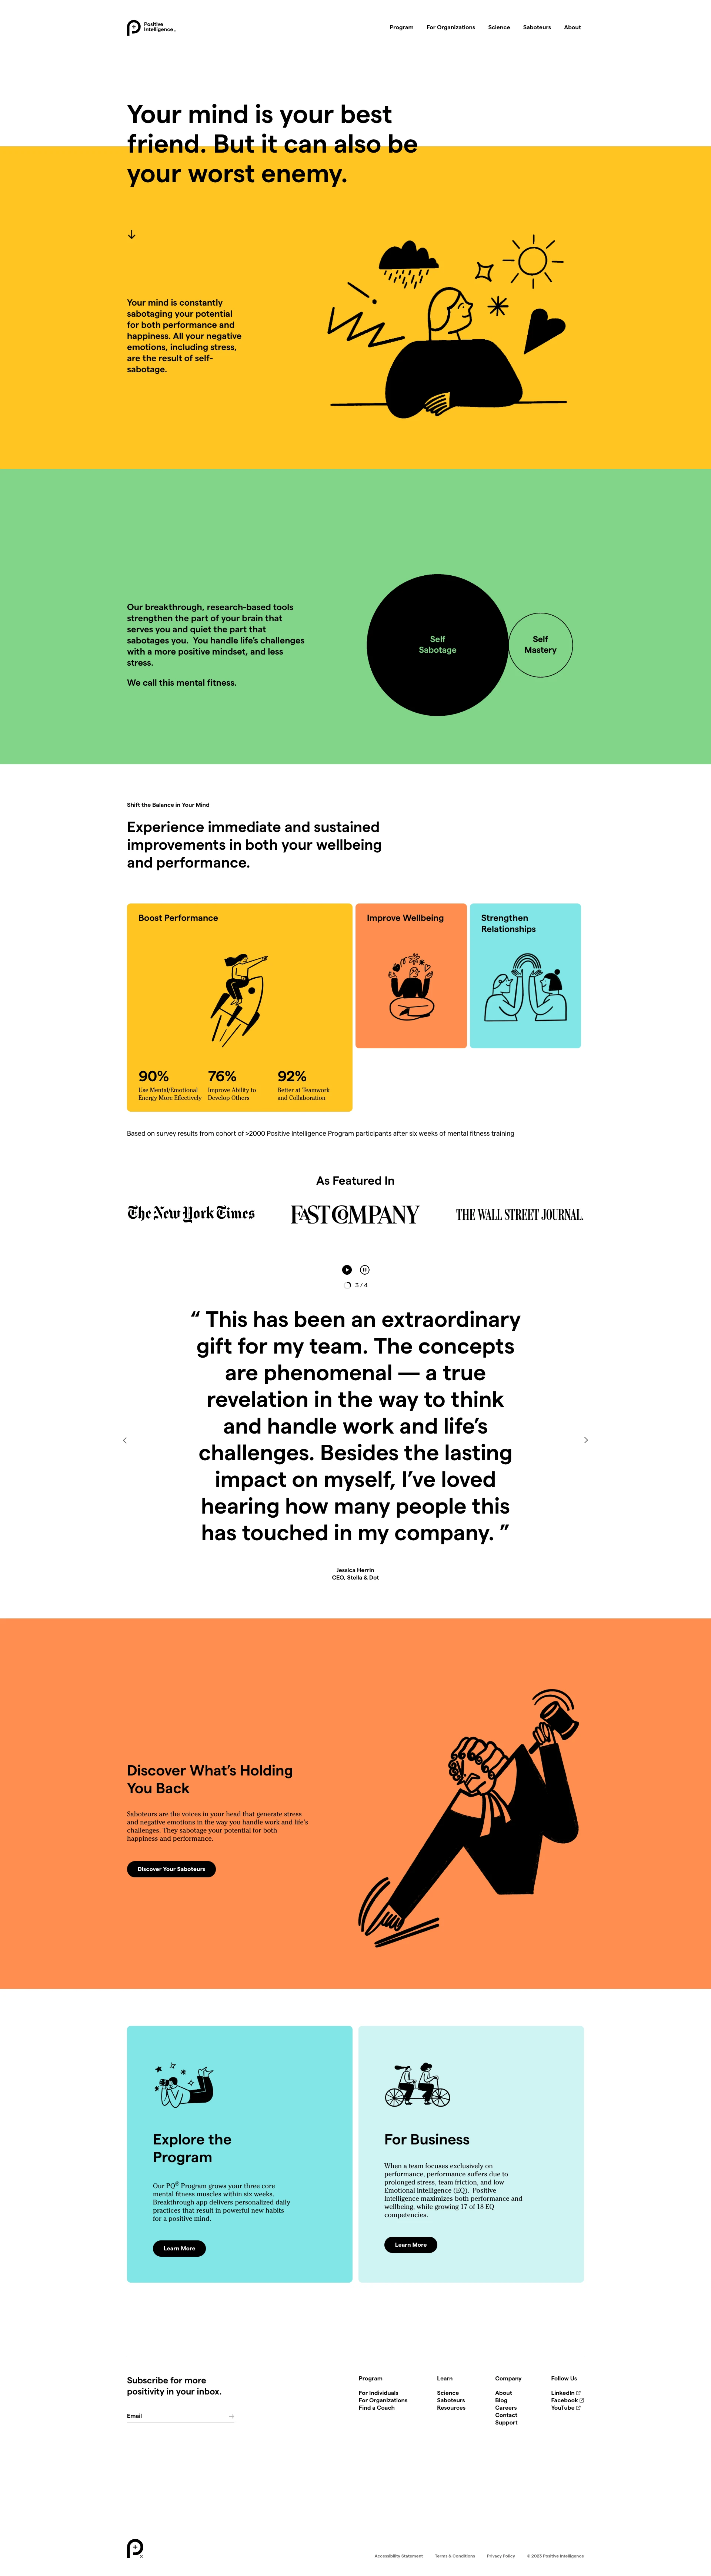 Positive Intelligence Landing Page Example: Your mind is your best friend. But it can also be your worst enemy. Your mind is constantly sabotaging your potential for both performance and happiness. All your negative emotions, including stress, are the result of self-sabotage.